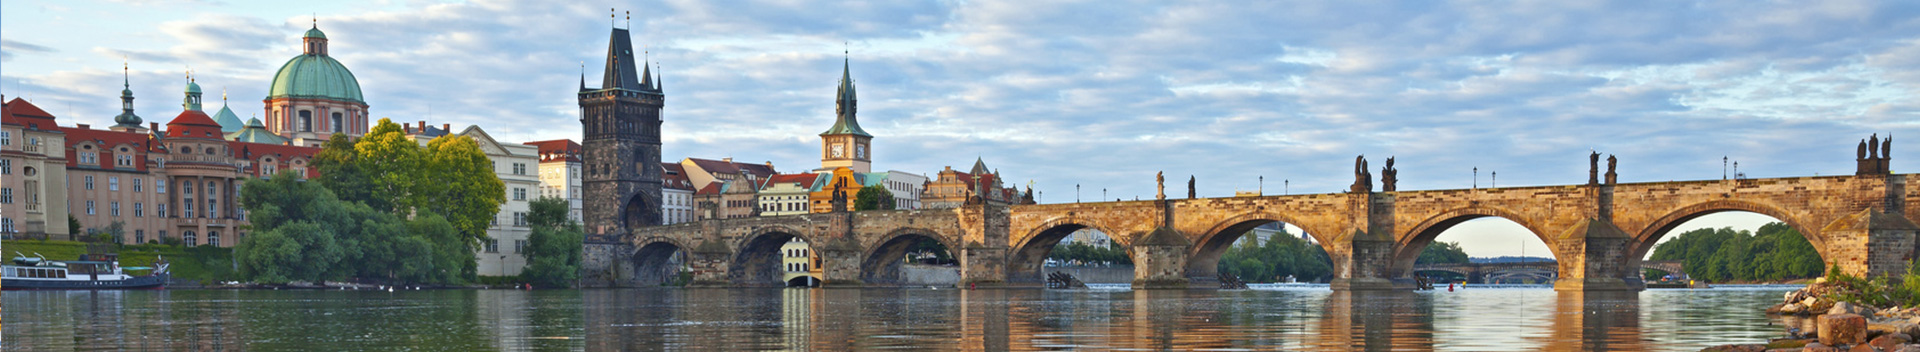 Private Tour of Prague by Car / Van and Driver-Guide